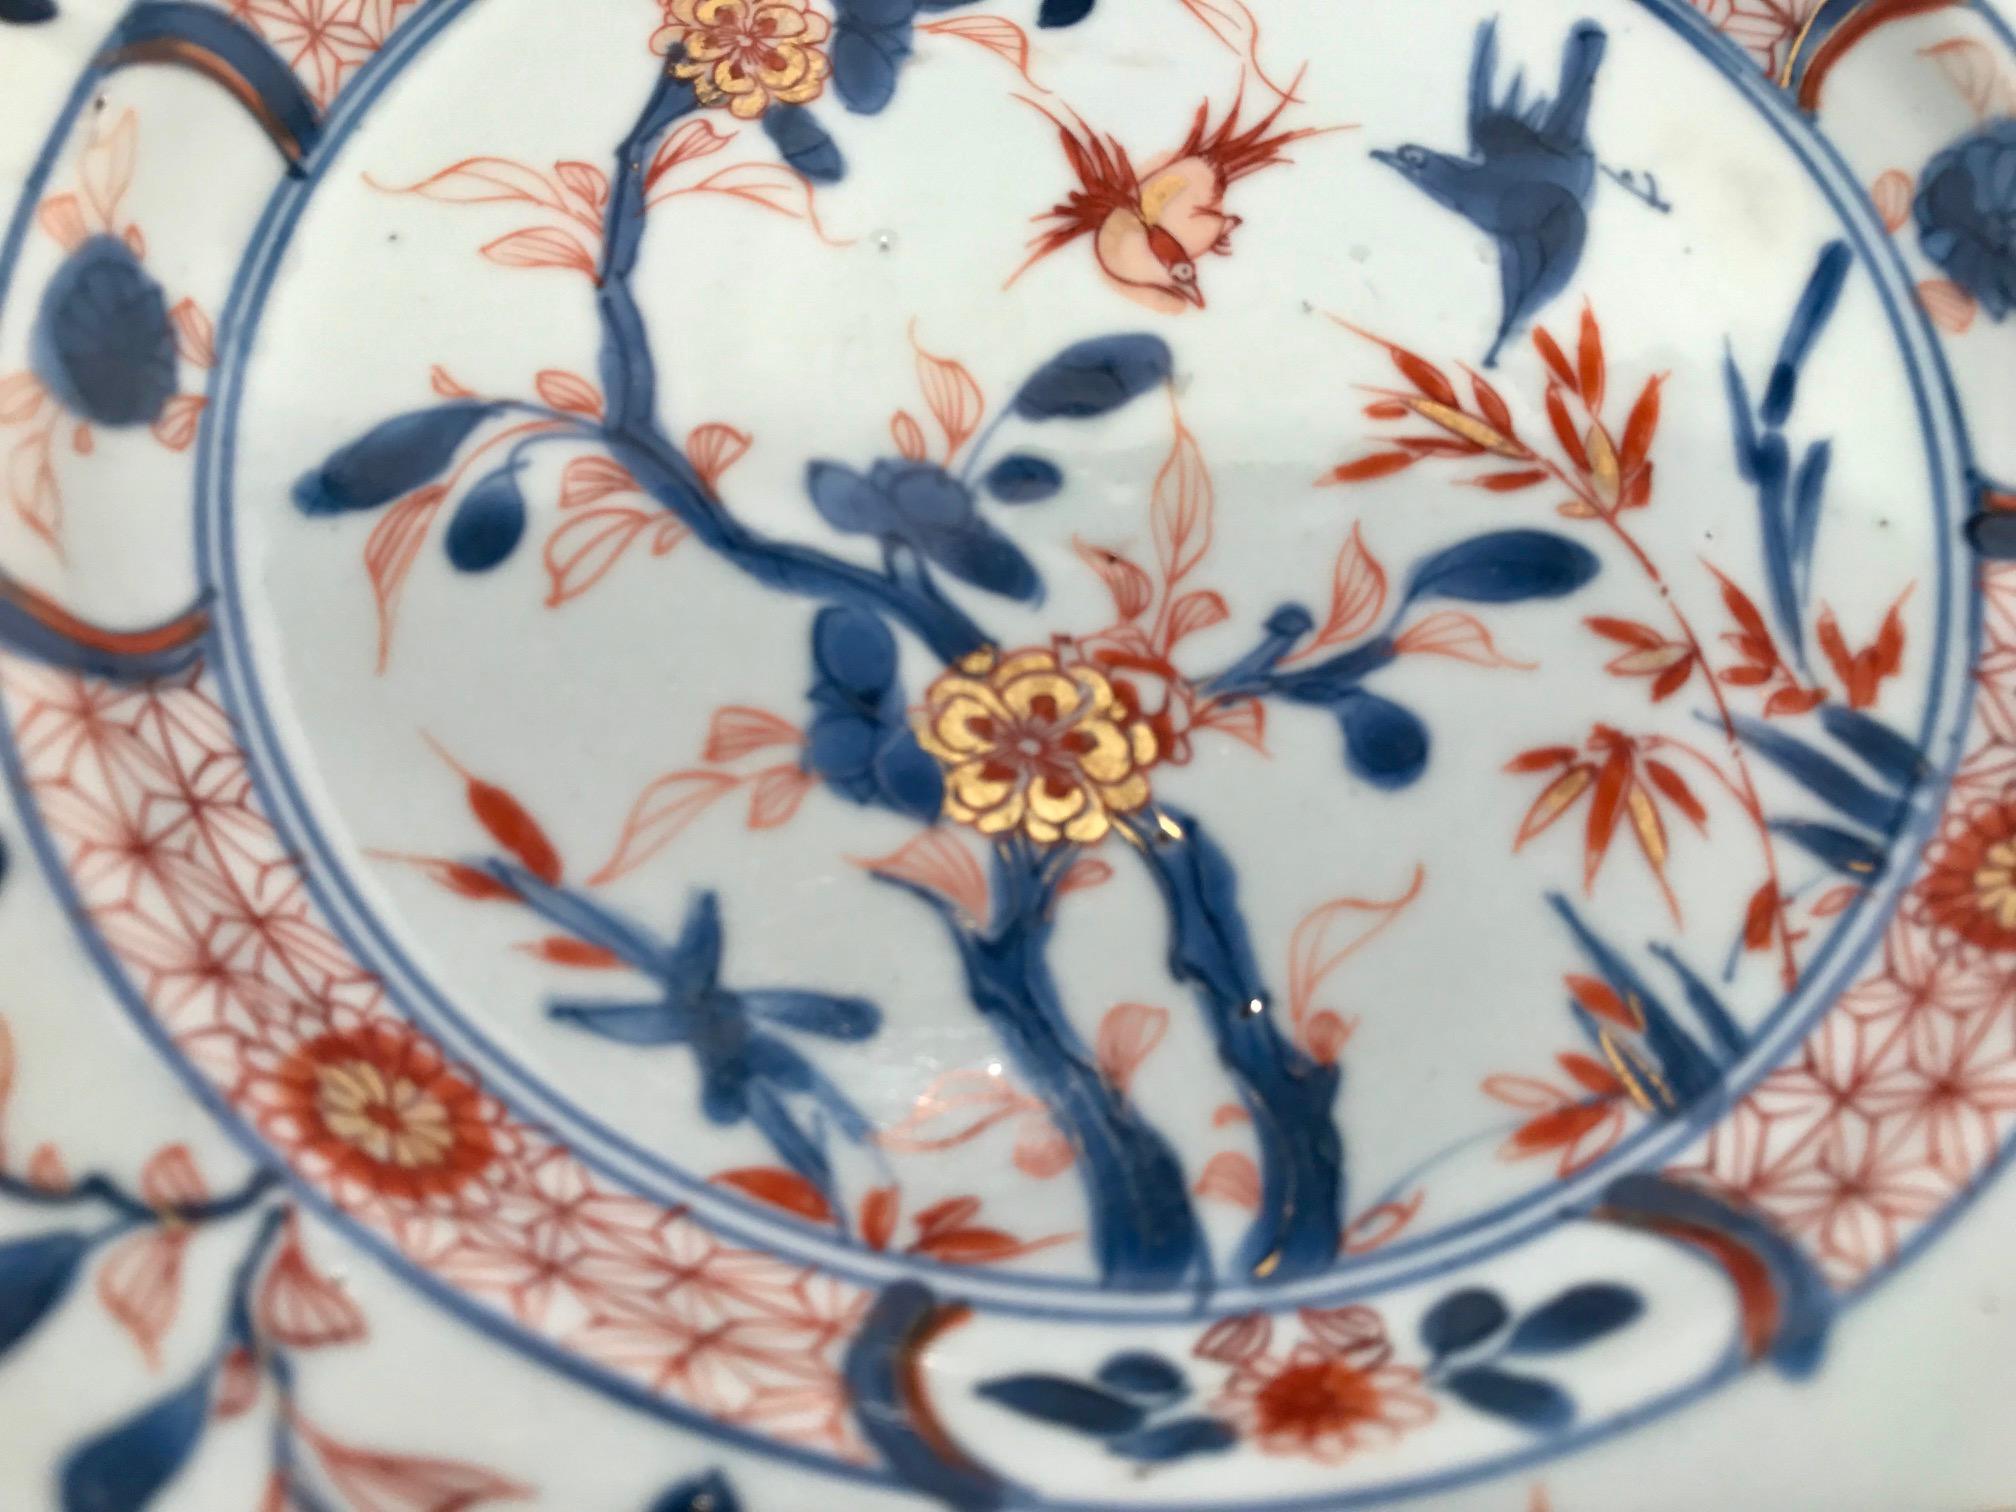 Hand-Crafted  Chinese Imari Export Porcelain Plate